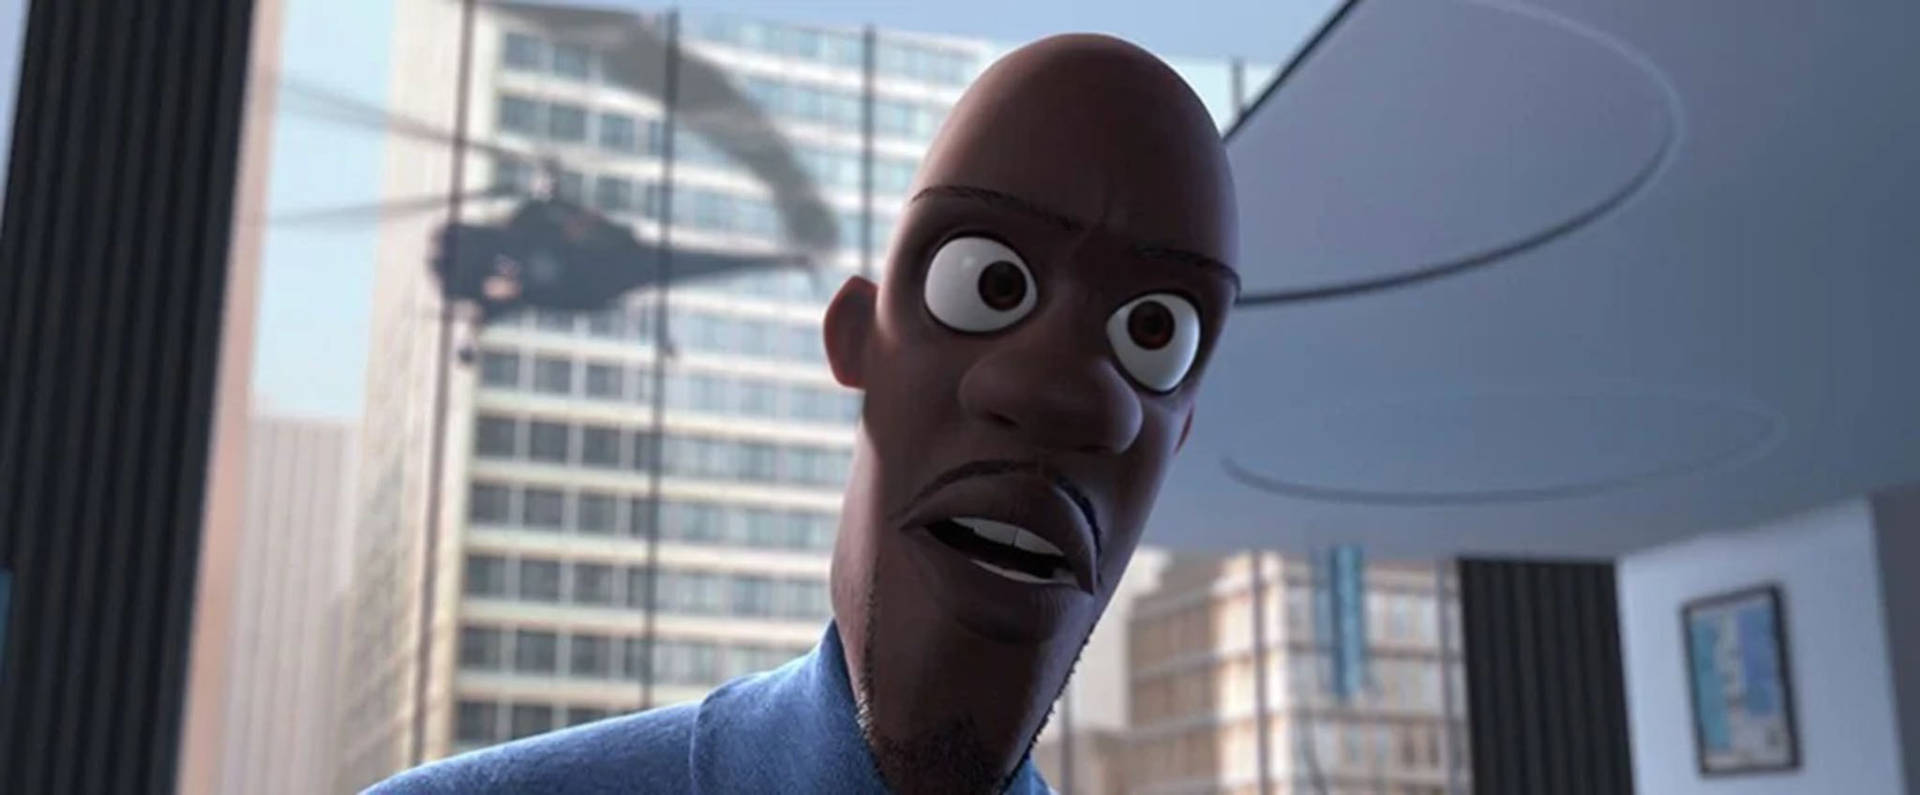 Skeptic Frozone Look Background